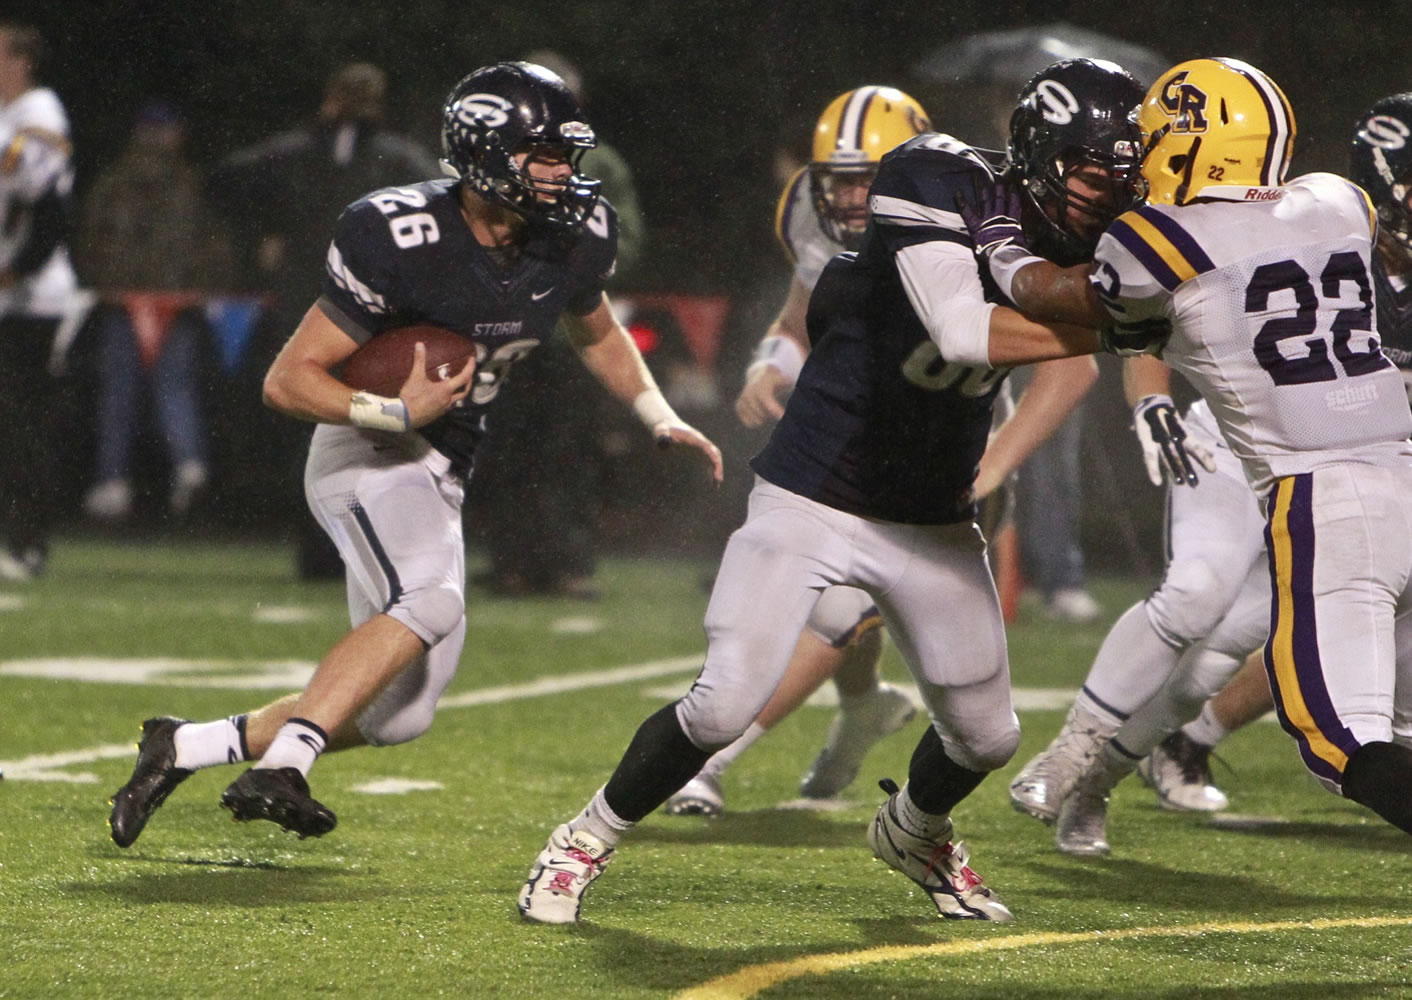 Skyview running back Blake Ingram (26) rushed for 214 yards and three touchdowns against Columbia River.